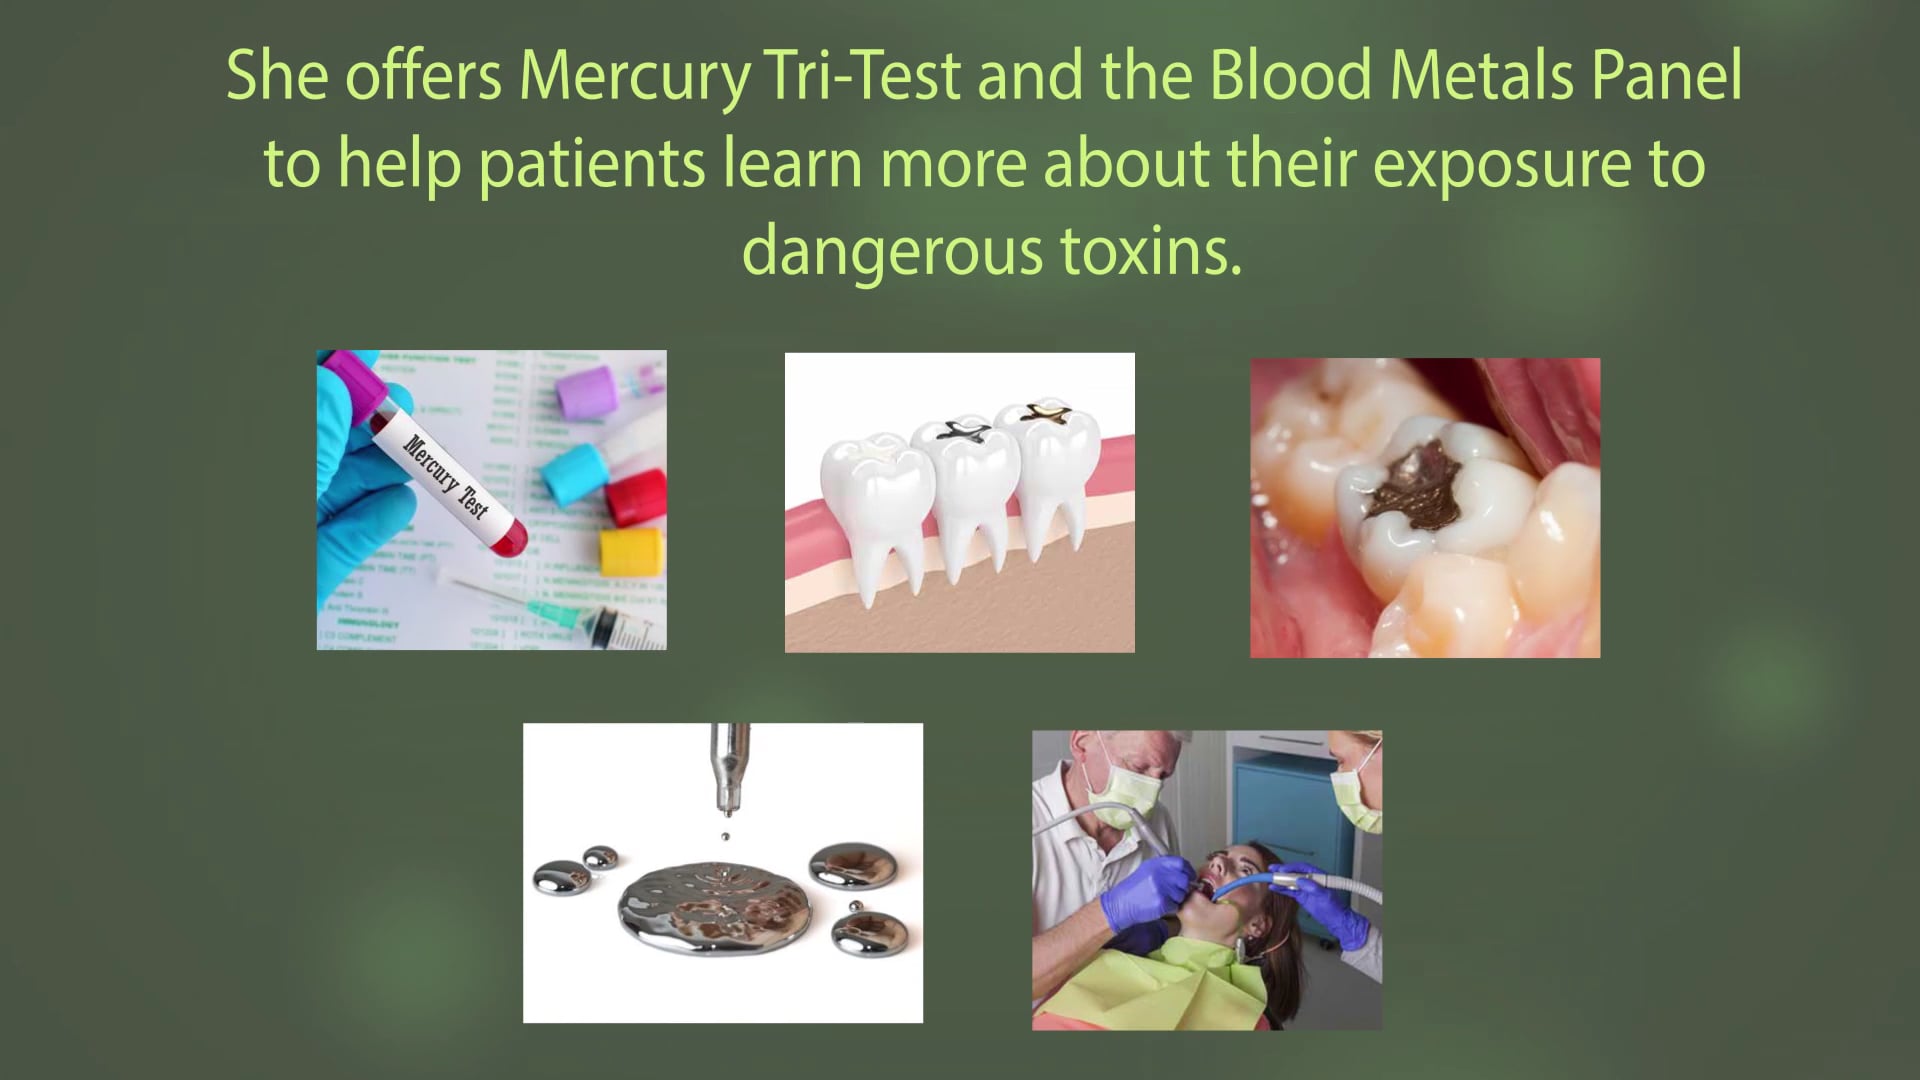 Dr. Titania Tong - promote Mercury Tri-Test in her office